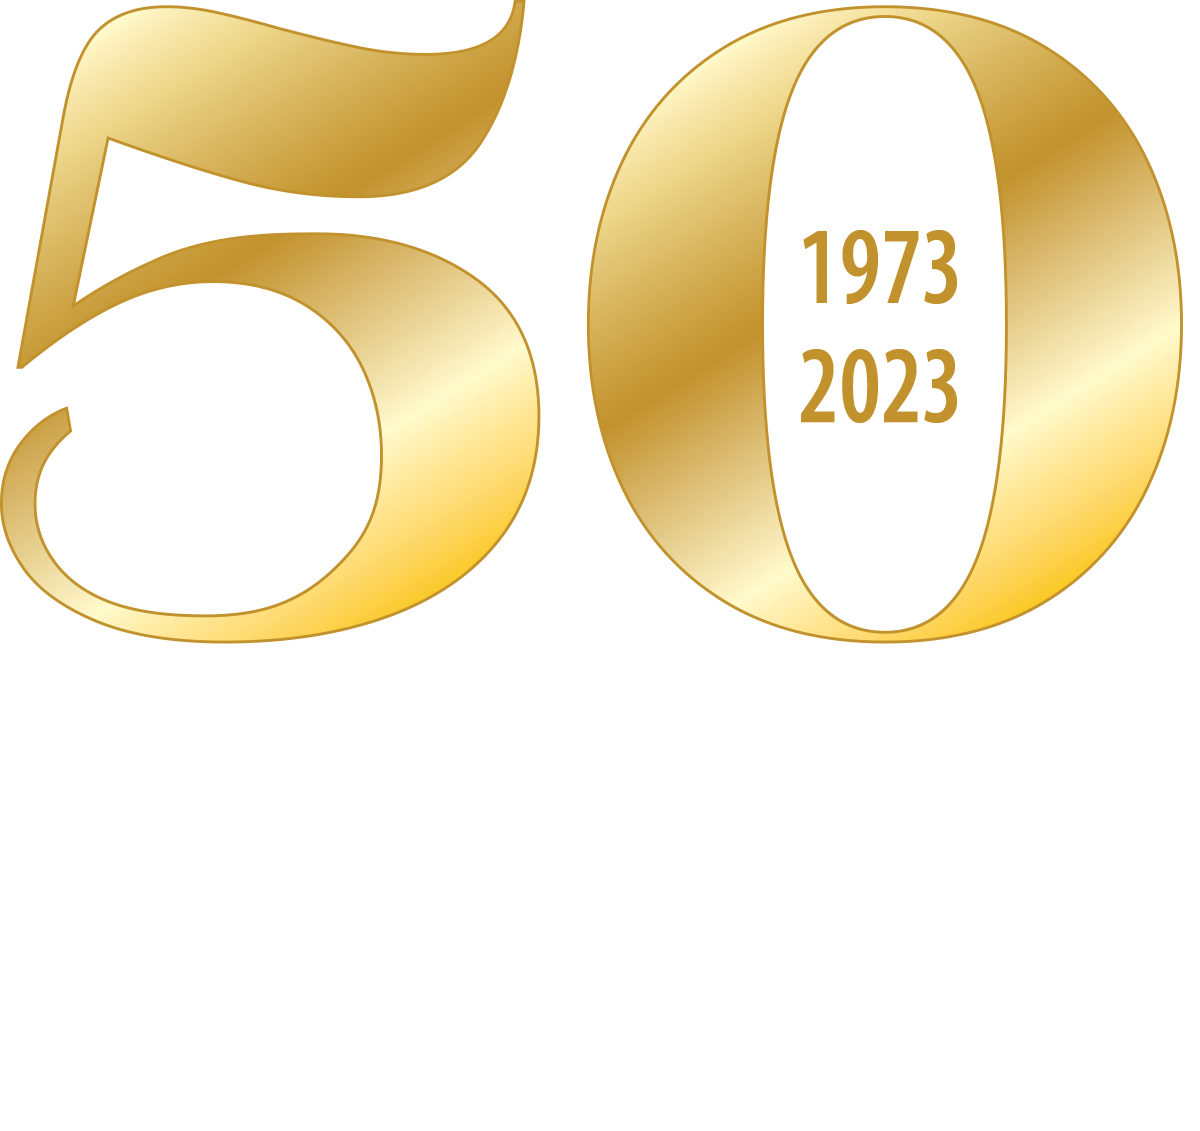 EVMS 50: A Legacy and a Promise